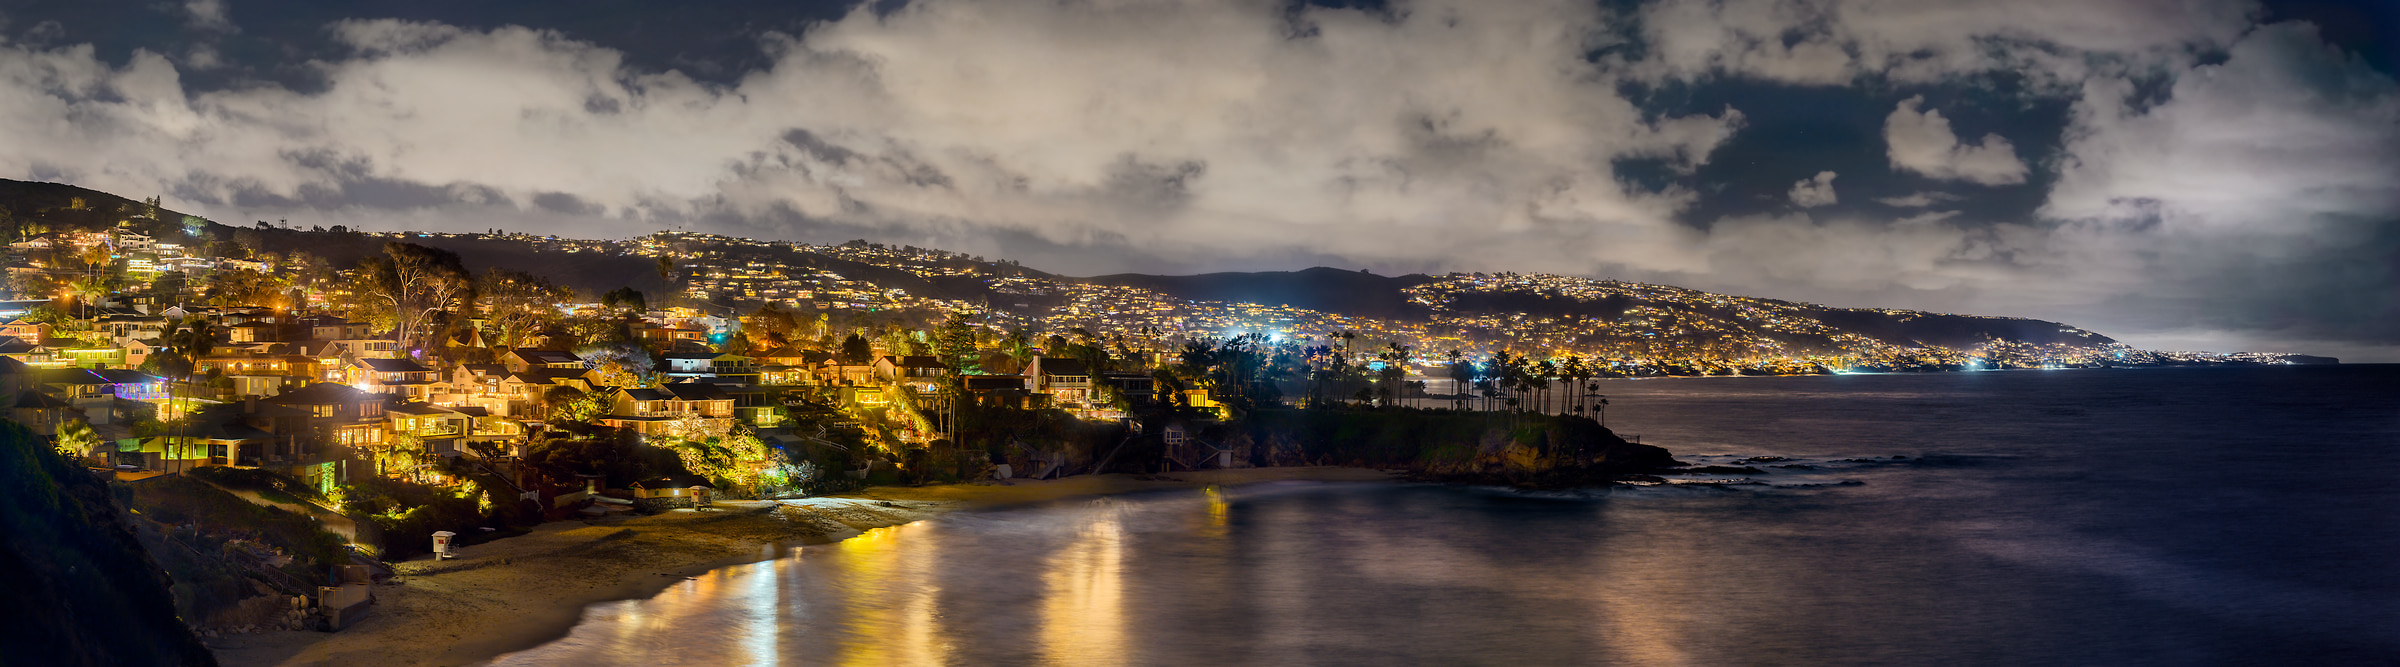 836 megapixels! A very high resolution, large-format VAST photo print of Laguna Beach in California; photograph created by Jim Tarpo.